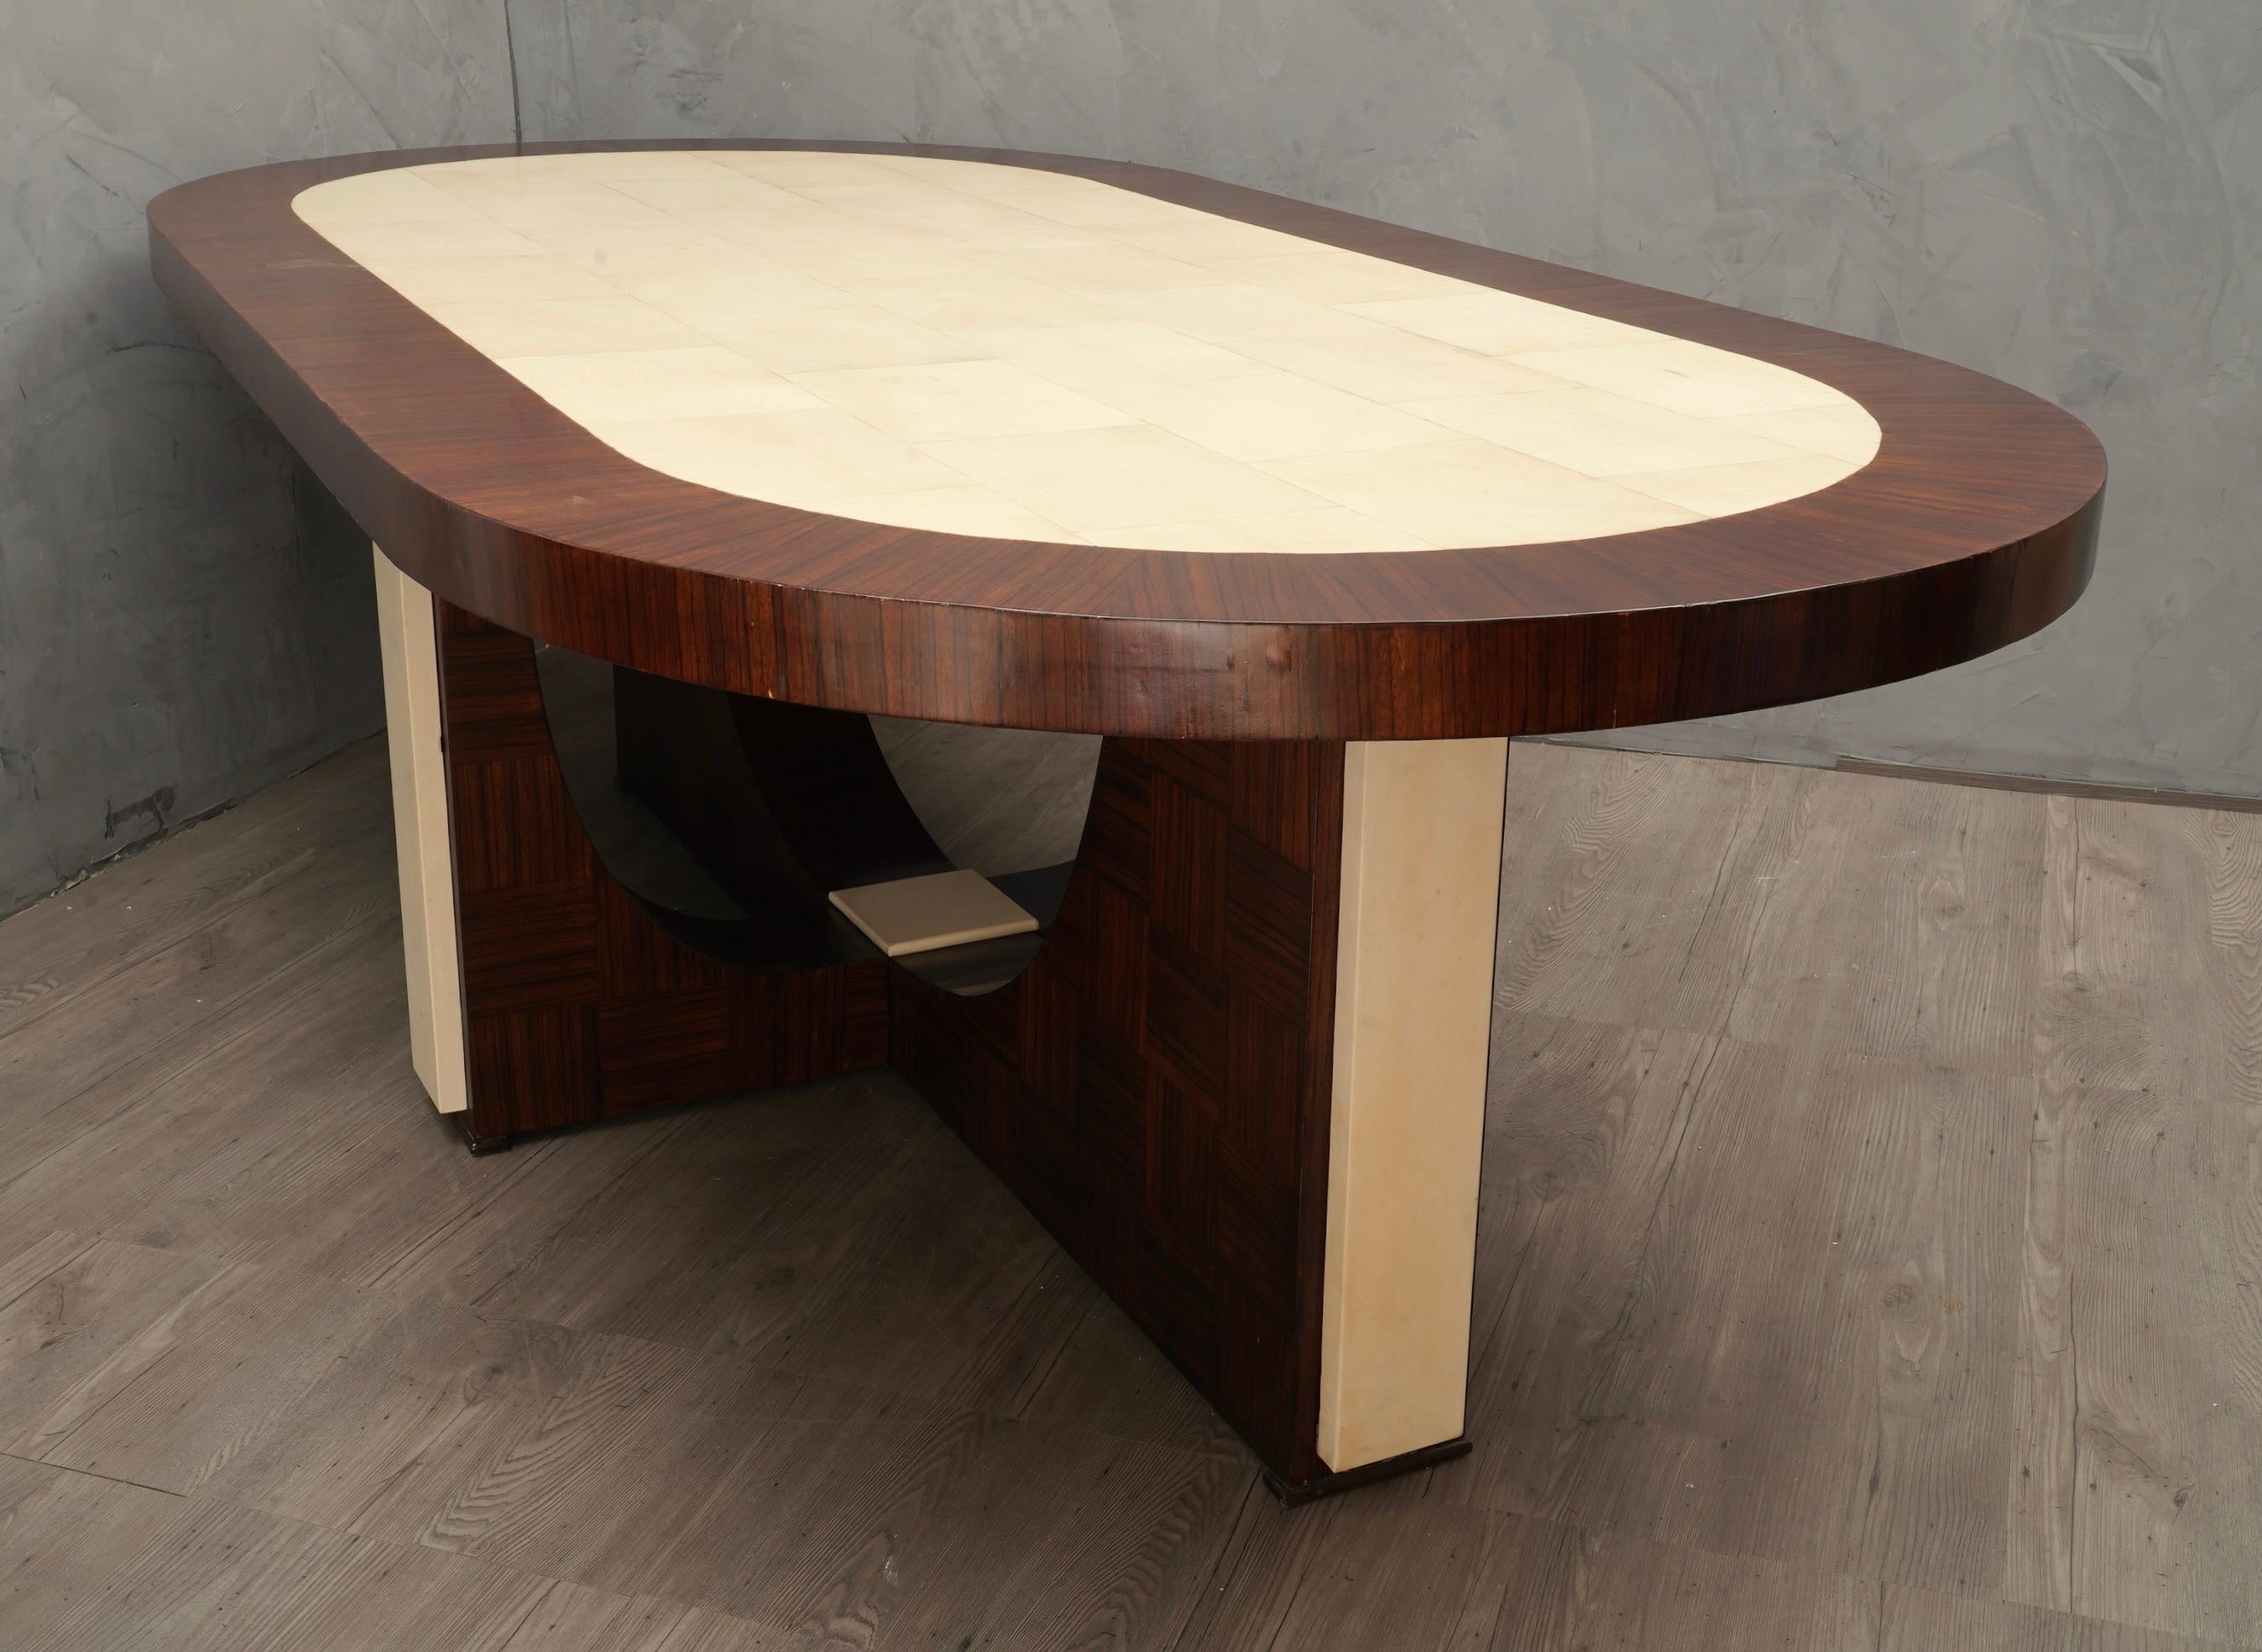 Midcentury Oval Zebrano Wood and Goatskin Italian Table, 1950 For Sale 1